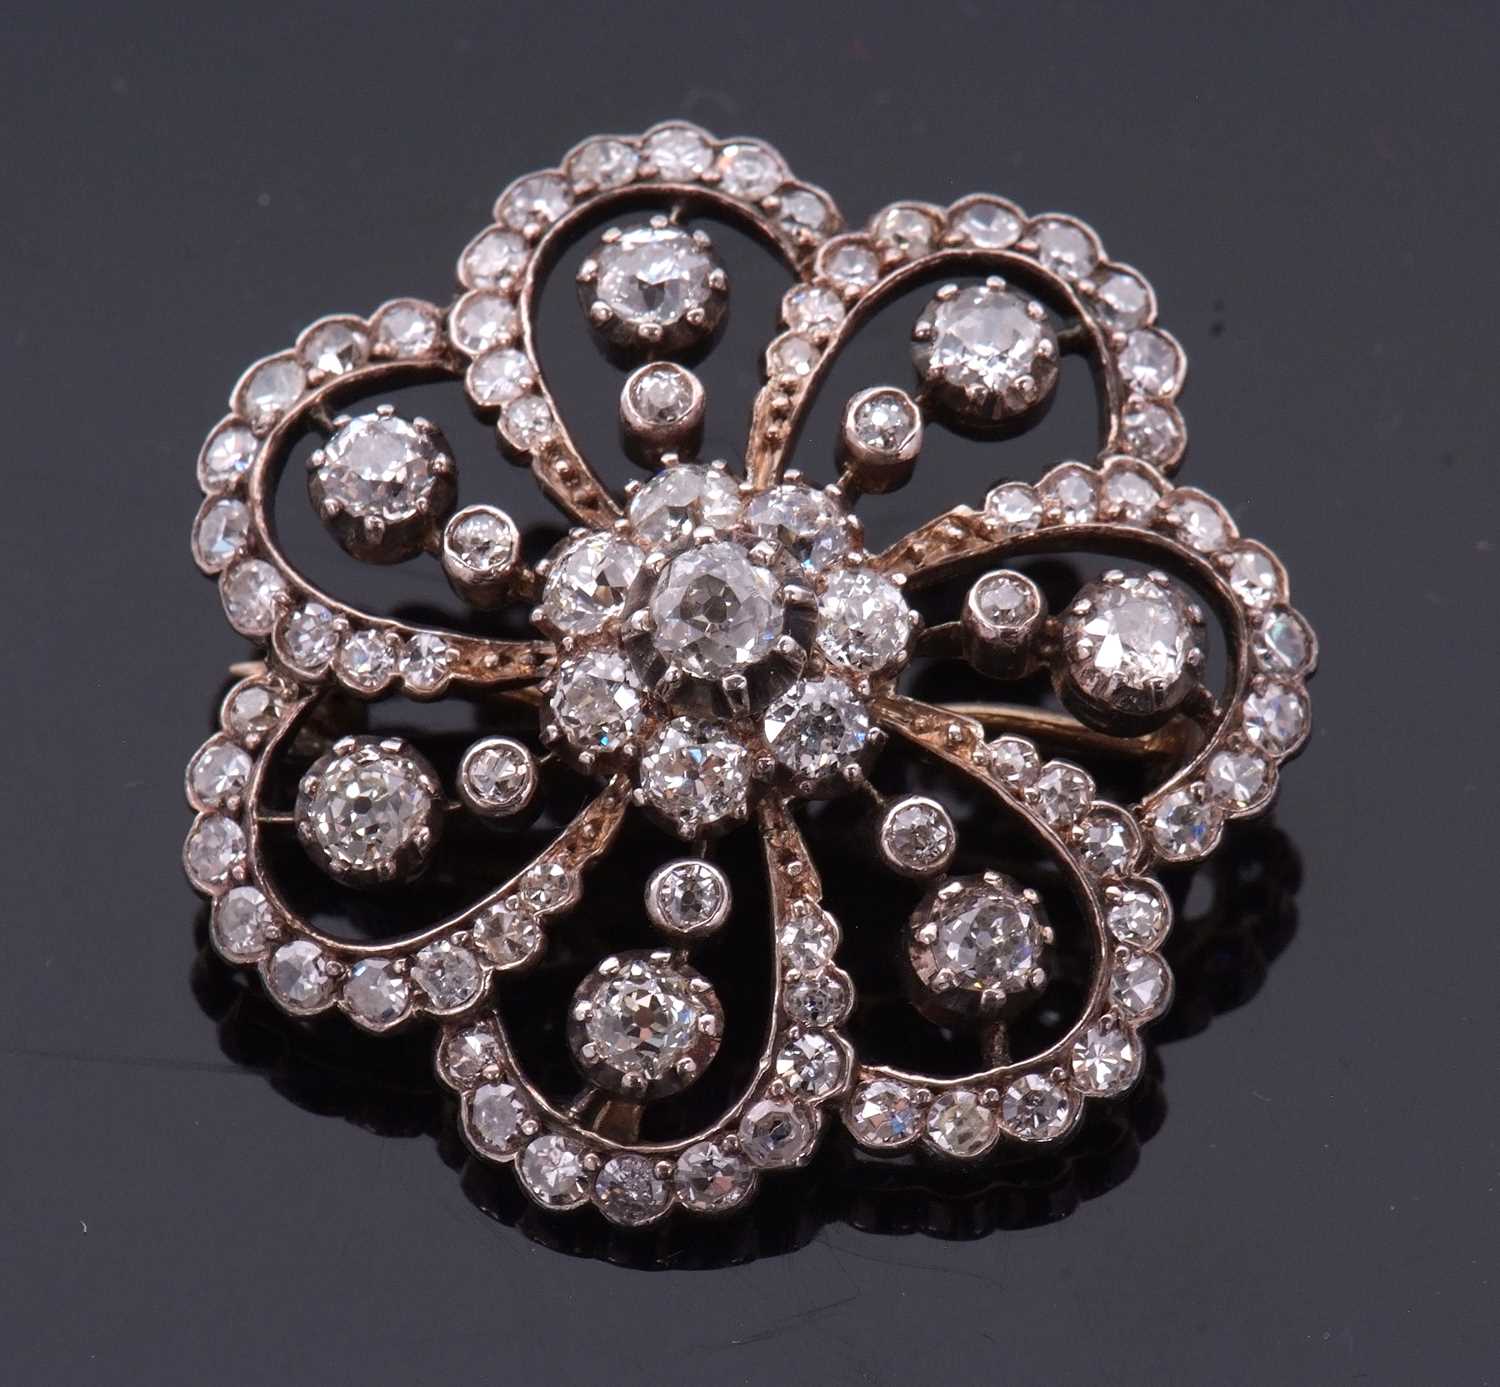 A late 19th/early 20th century diamond brooch, the central diamond flowerhead cluster, surrounded by - Image 6 of 8